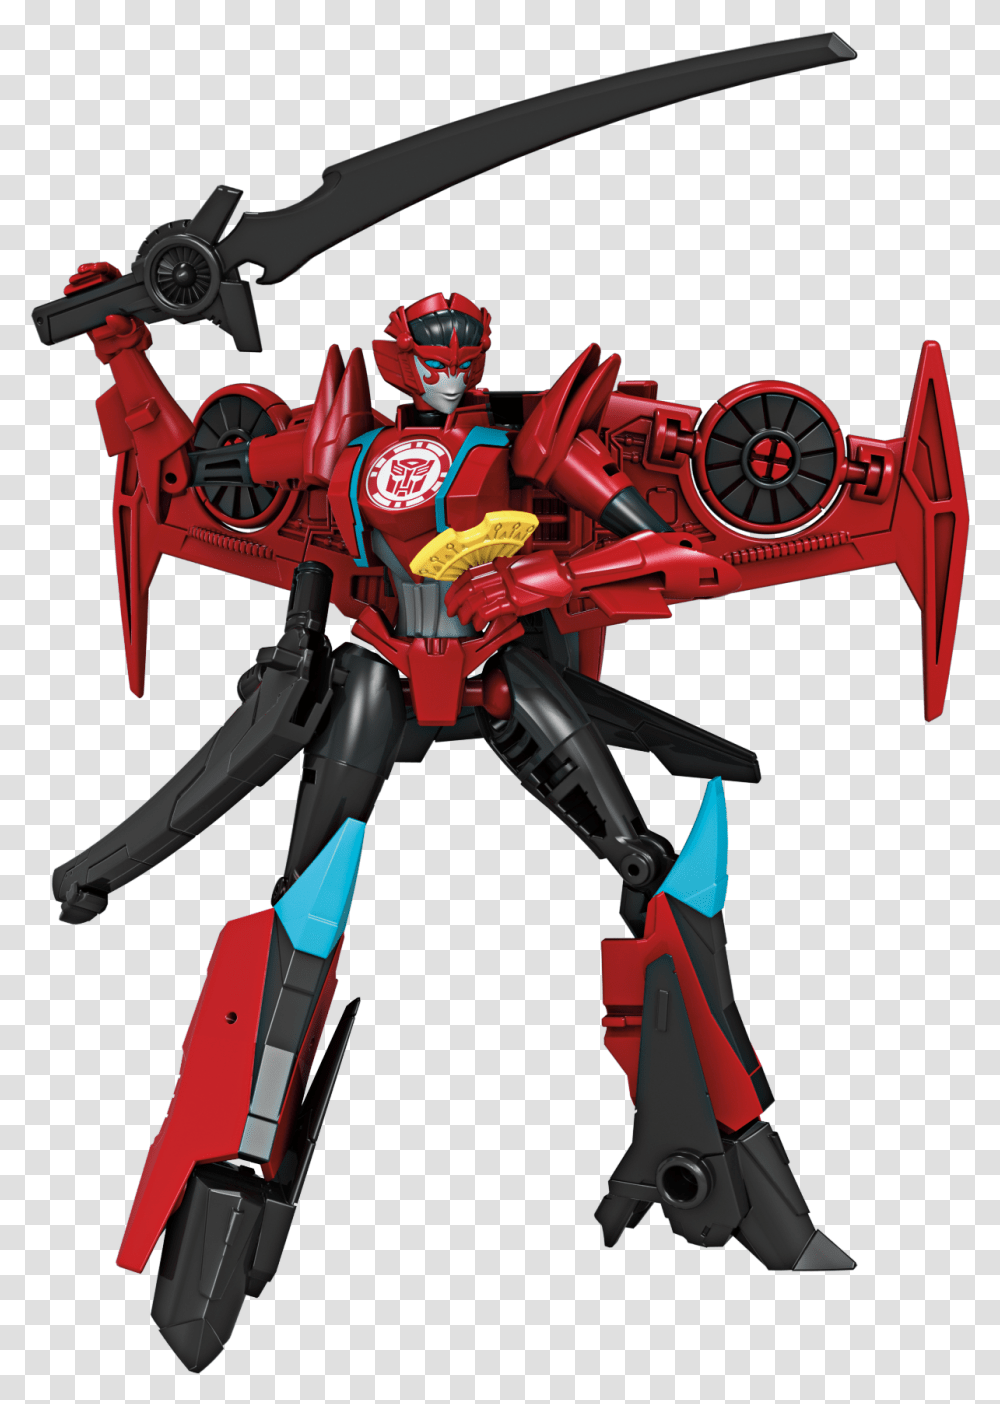 Official Hasbro Robots In Disguise Transformers Robots In Disguise Warrior Windblade, Toy, Duel Transparent Png